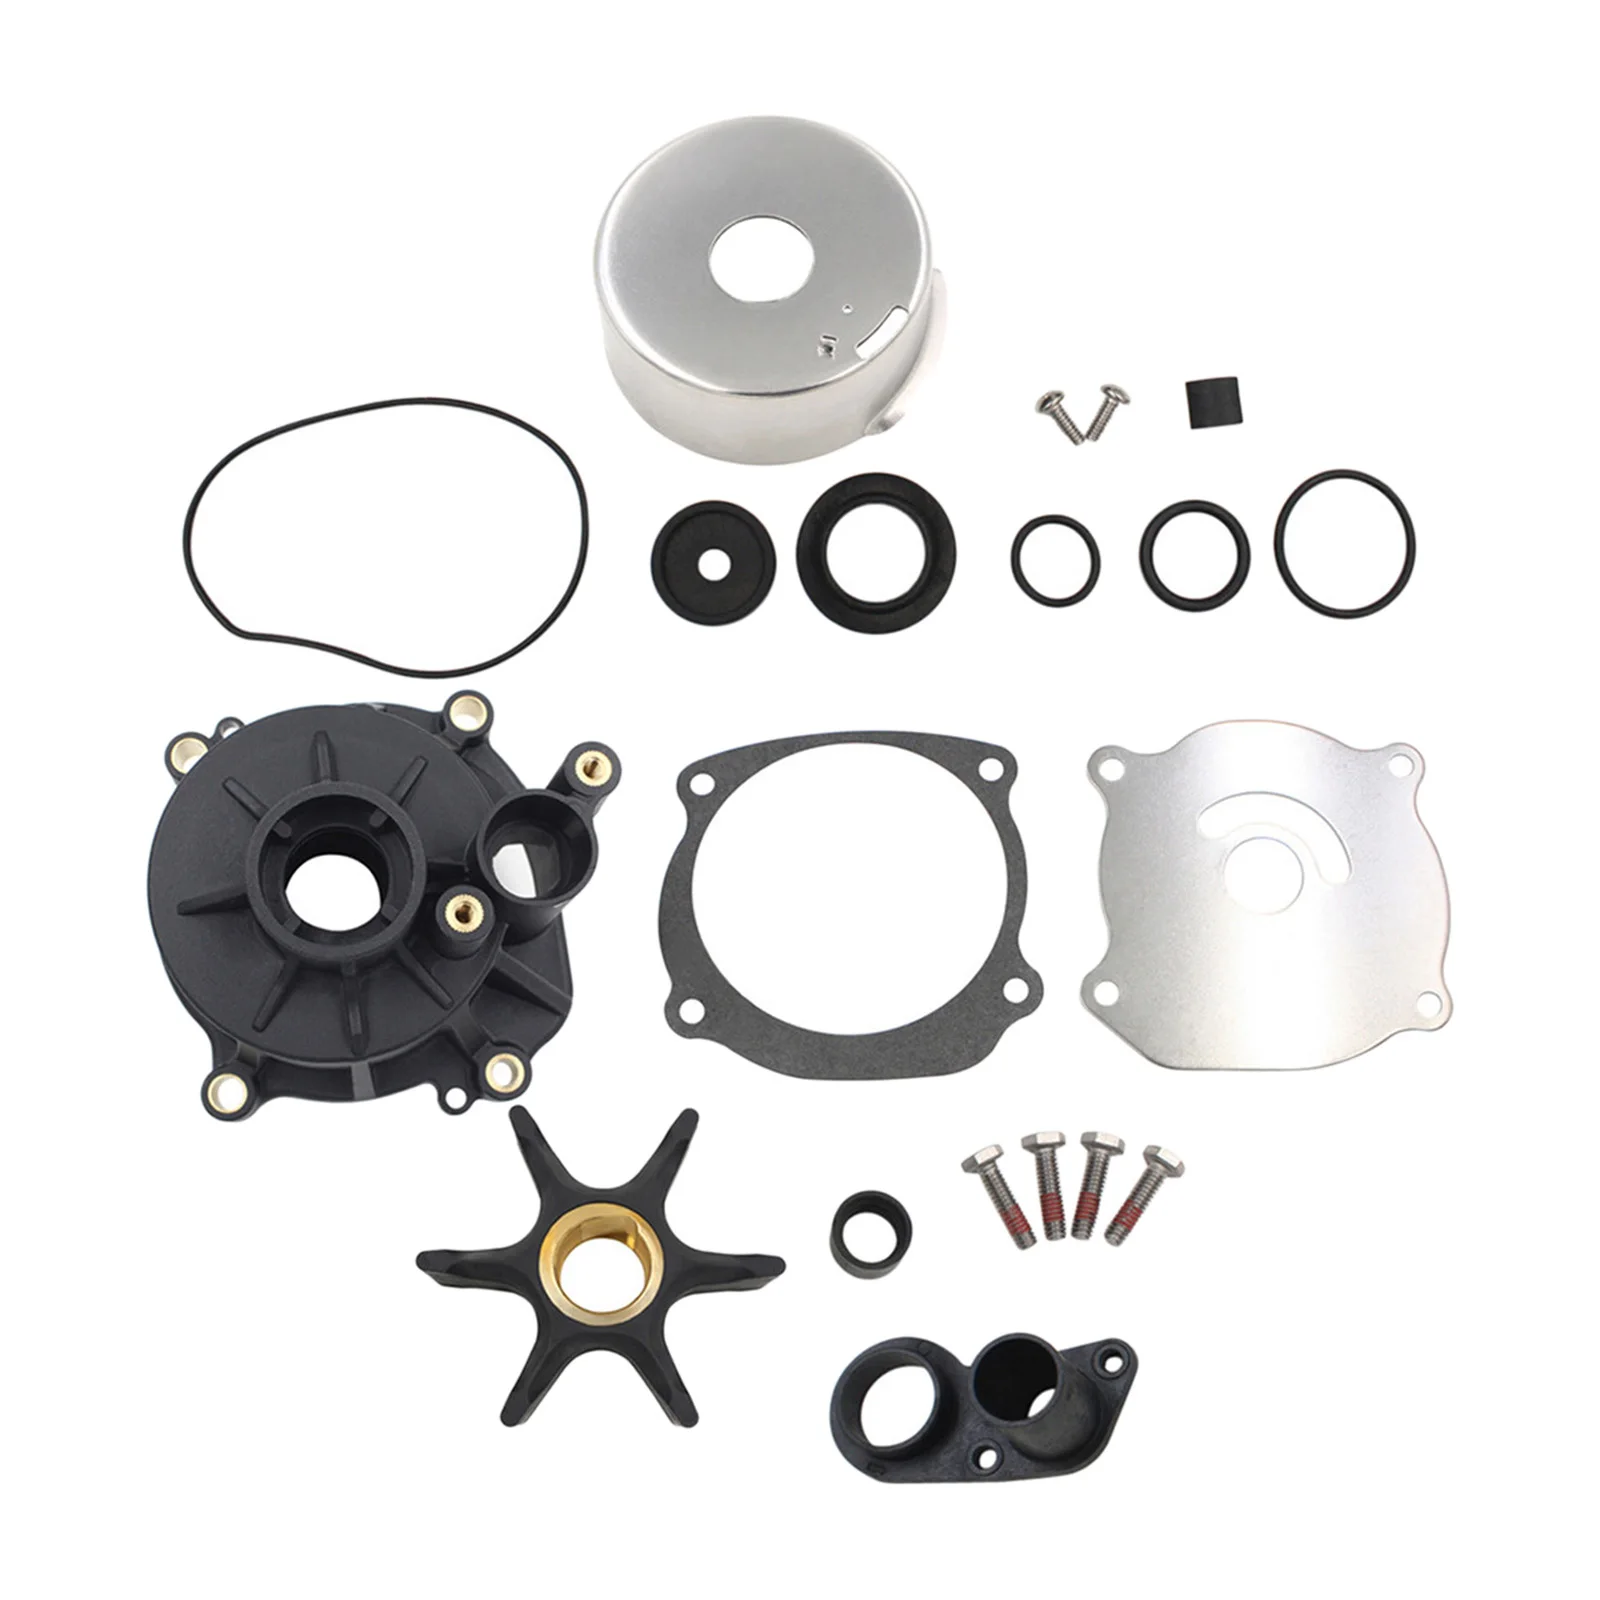 Boat Water Pump Repair Set with Housing for Johnson Evinrude Outboard OMC Motors 5001594 434421